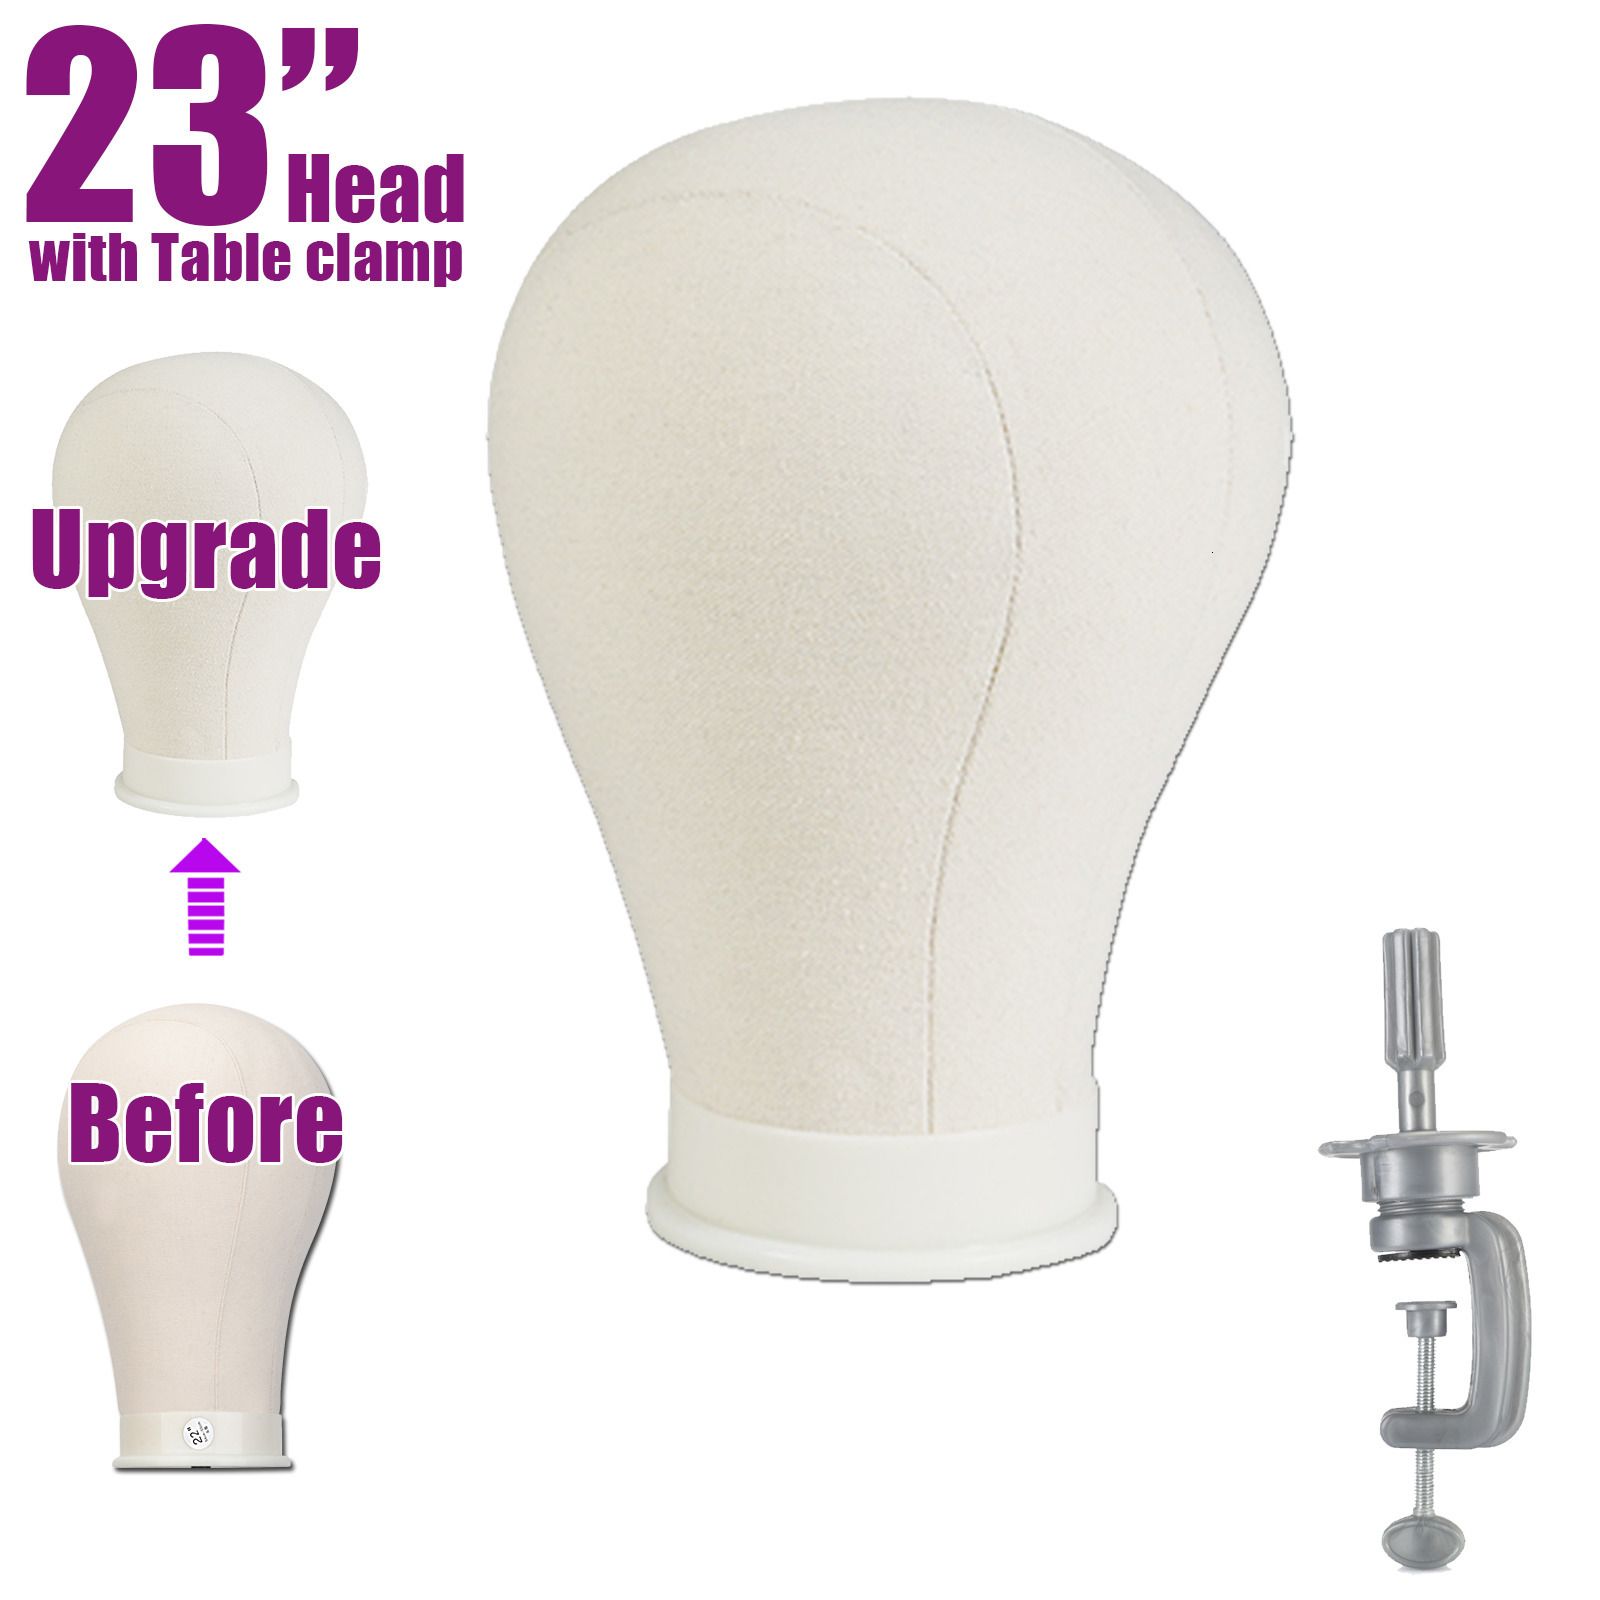 Upgarde tabell Clamp12